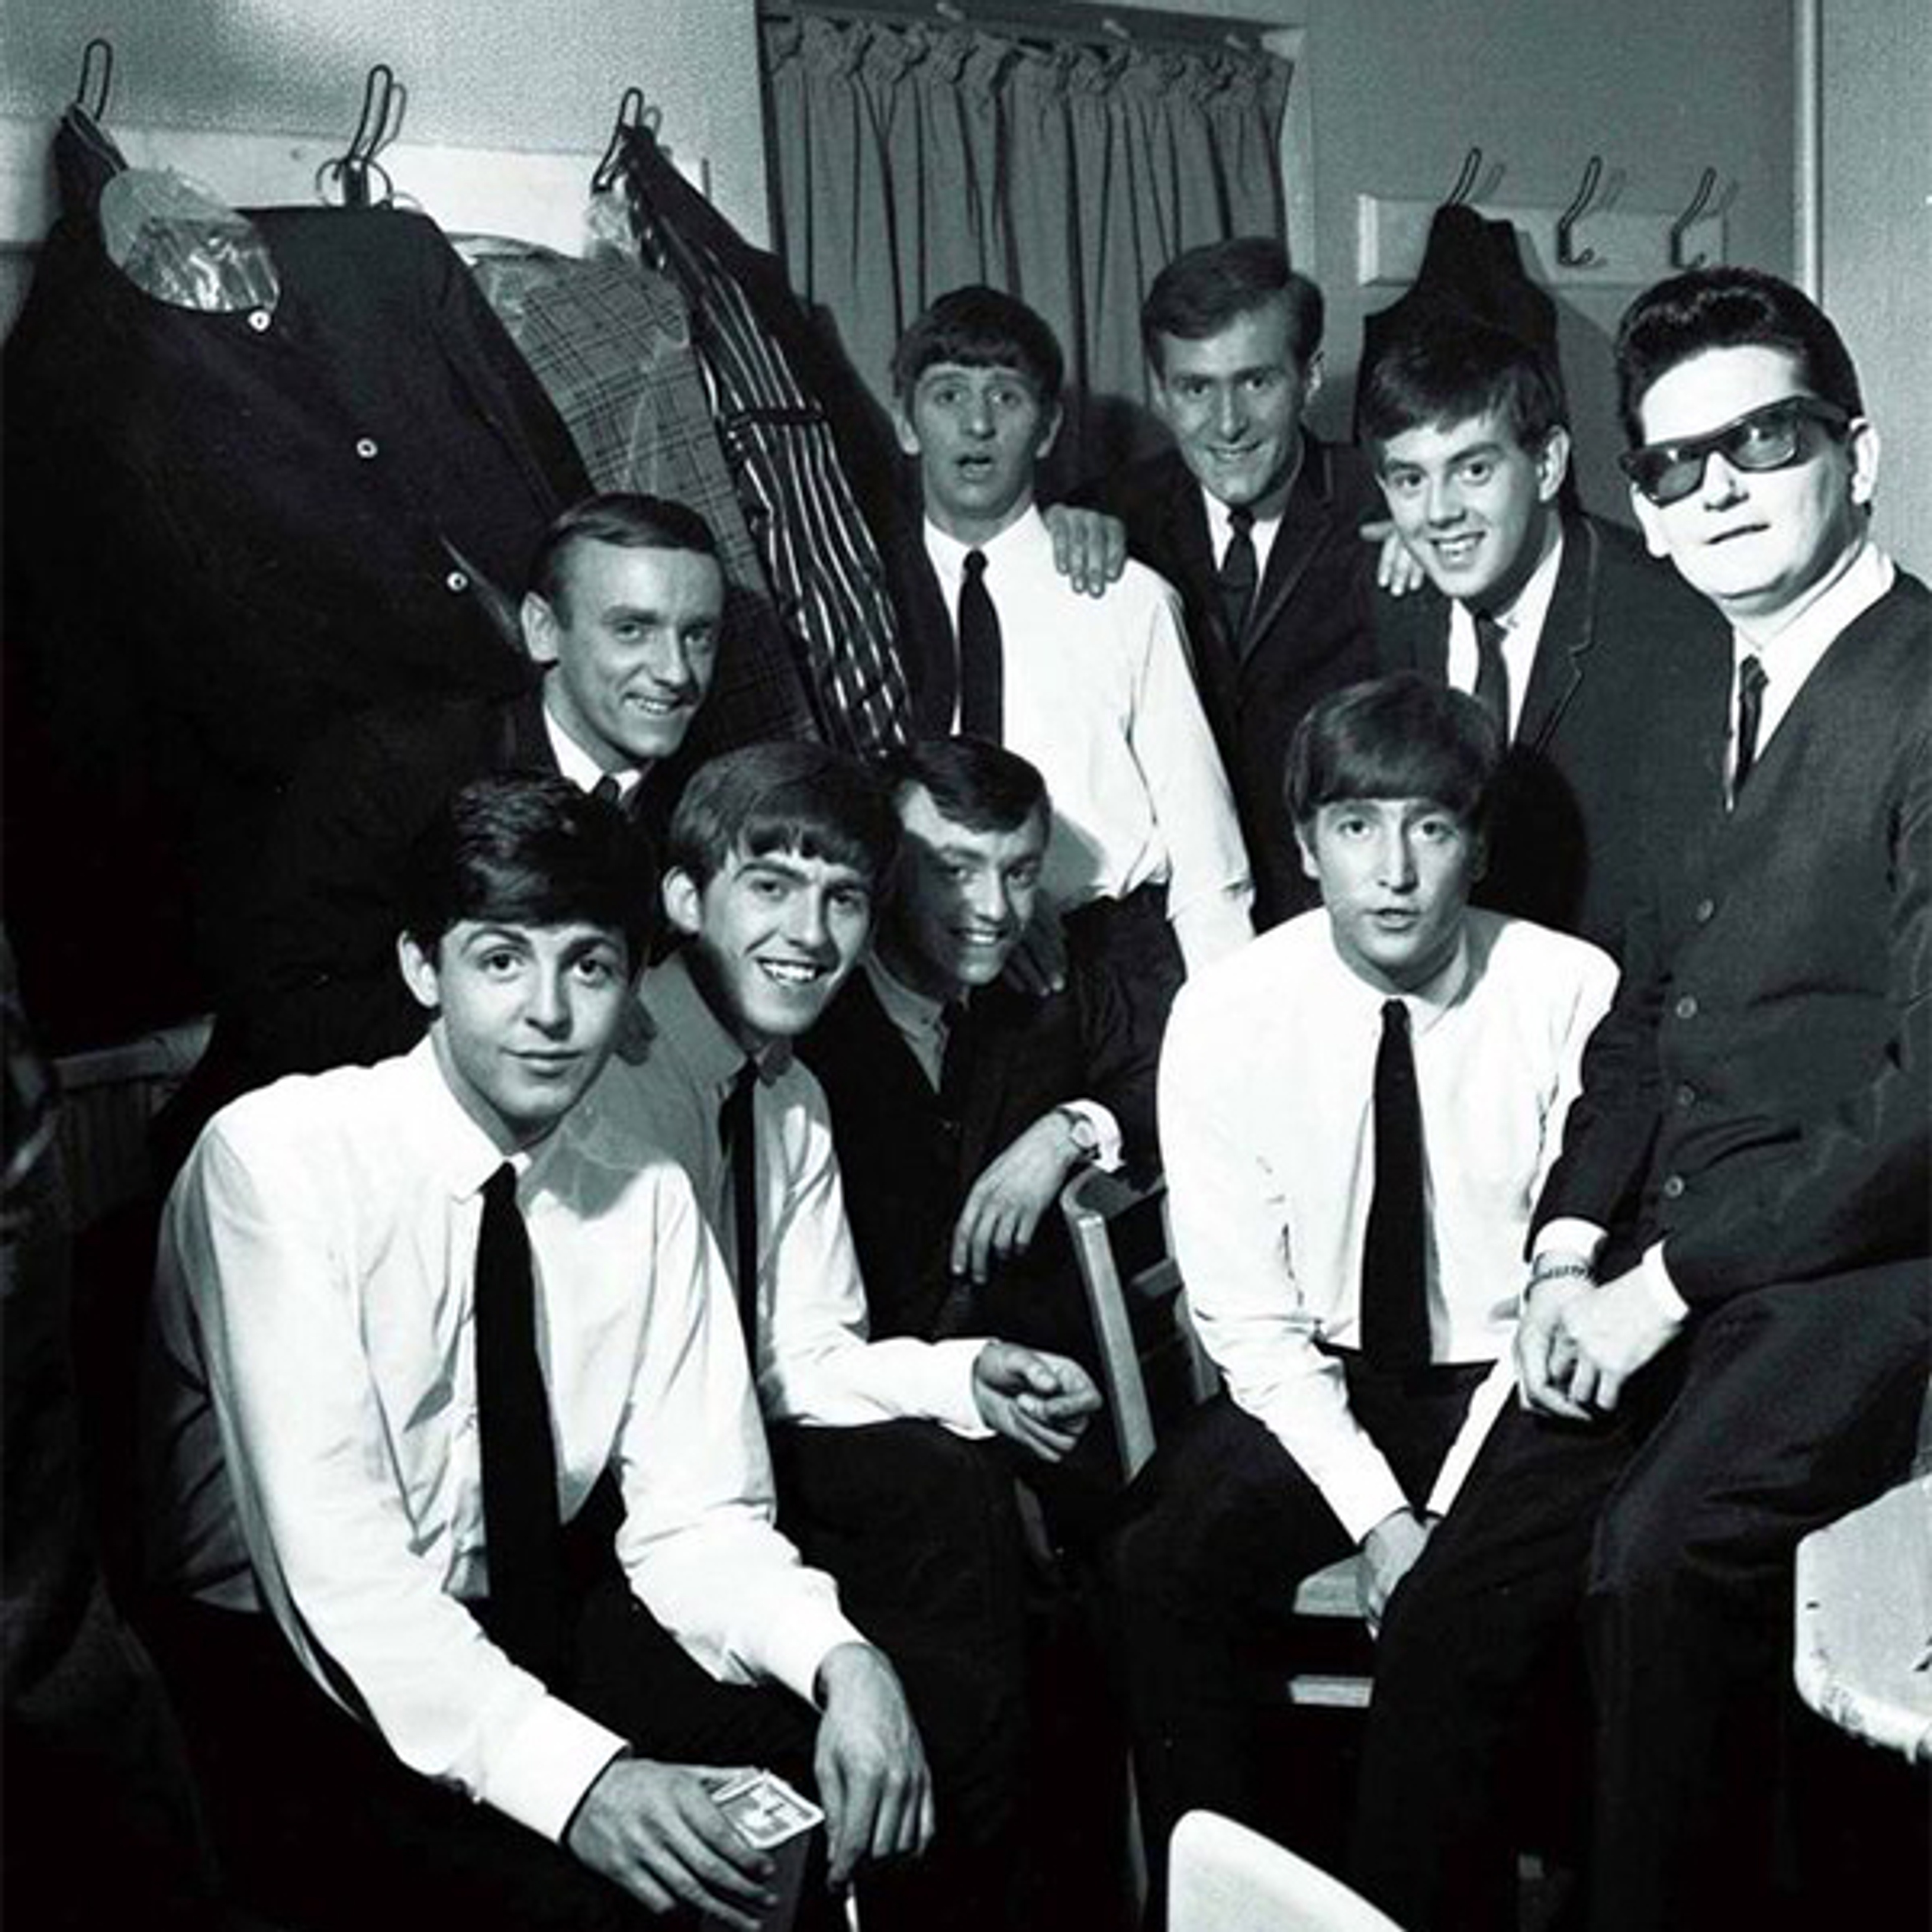 The Beatles with Gerry and the Pacemakers